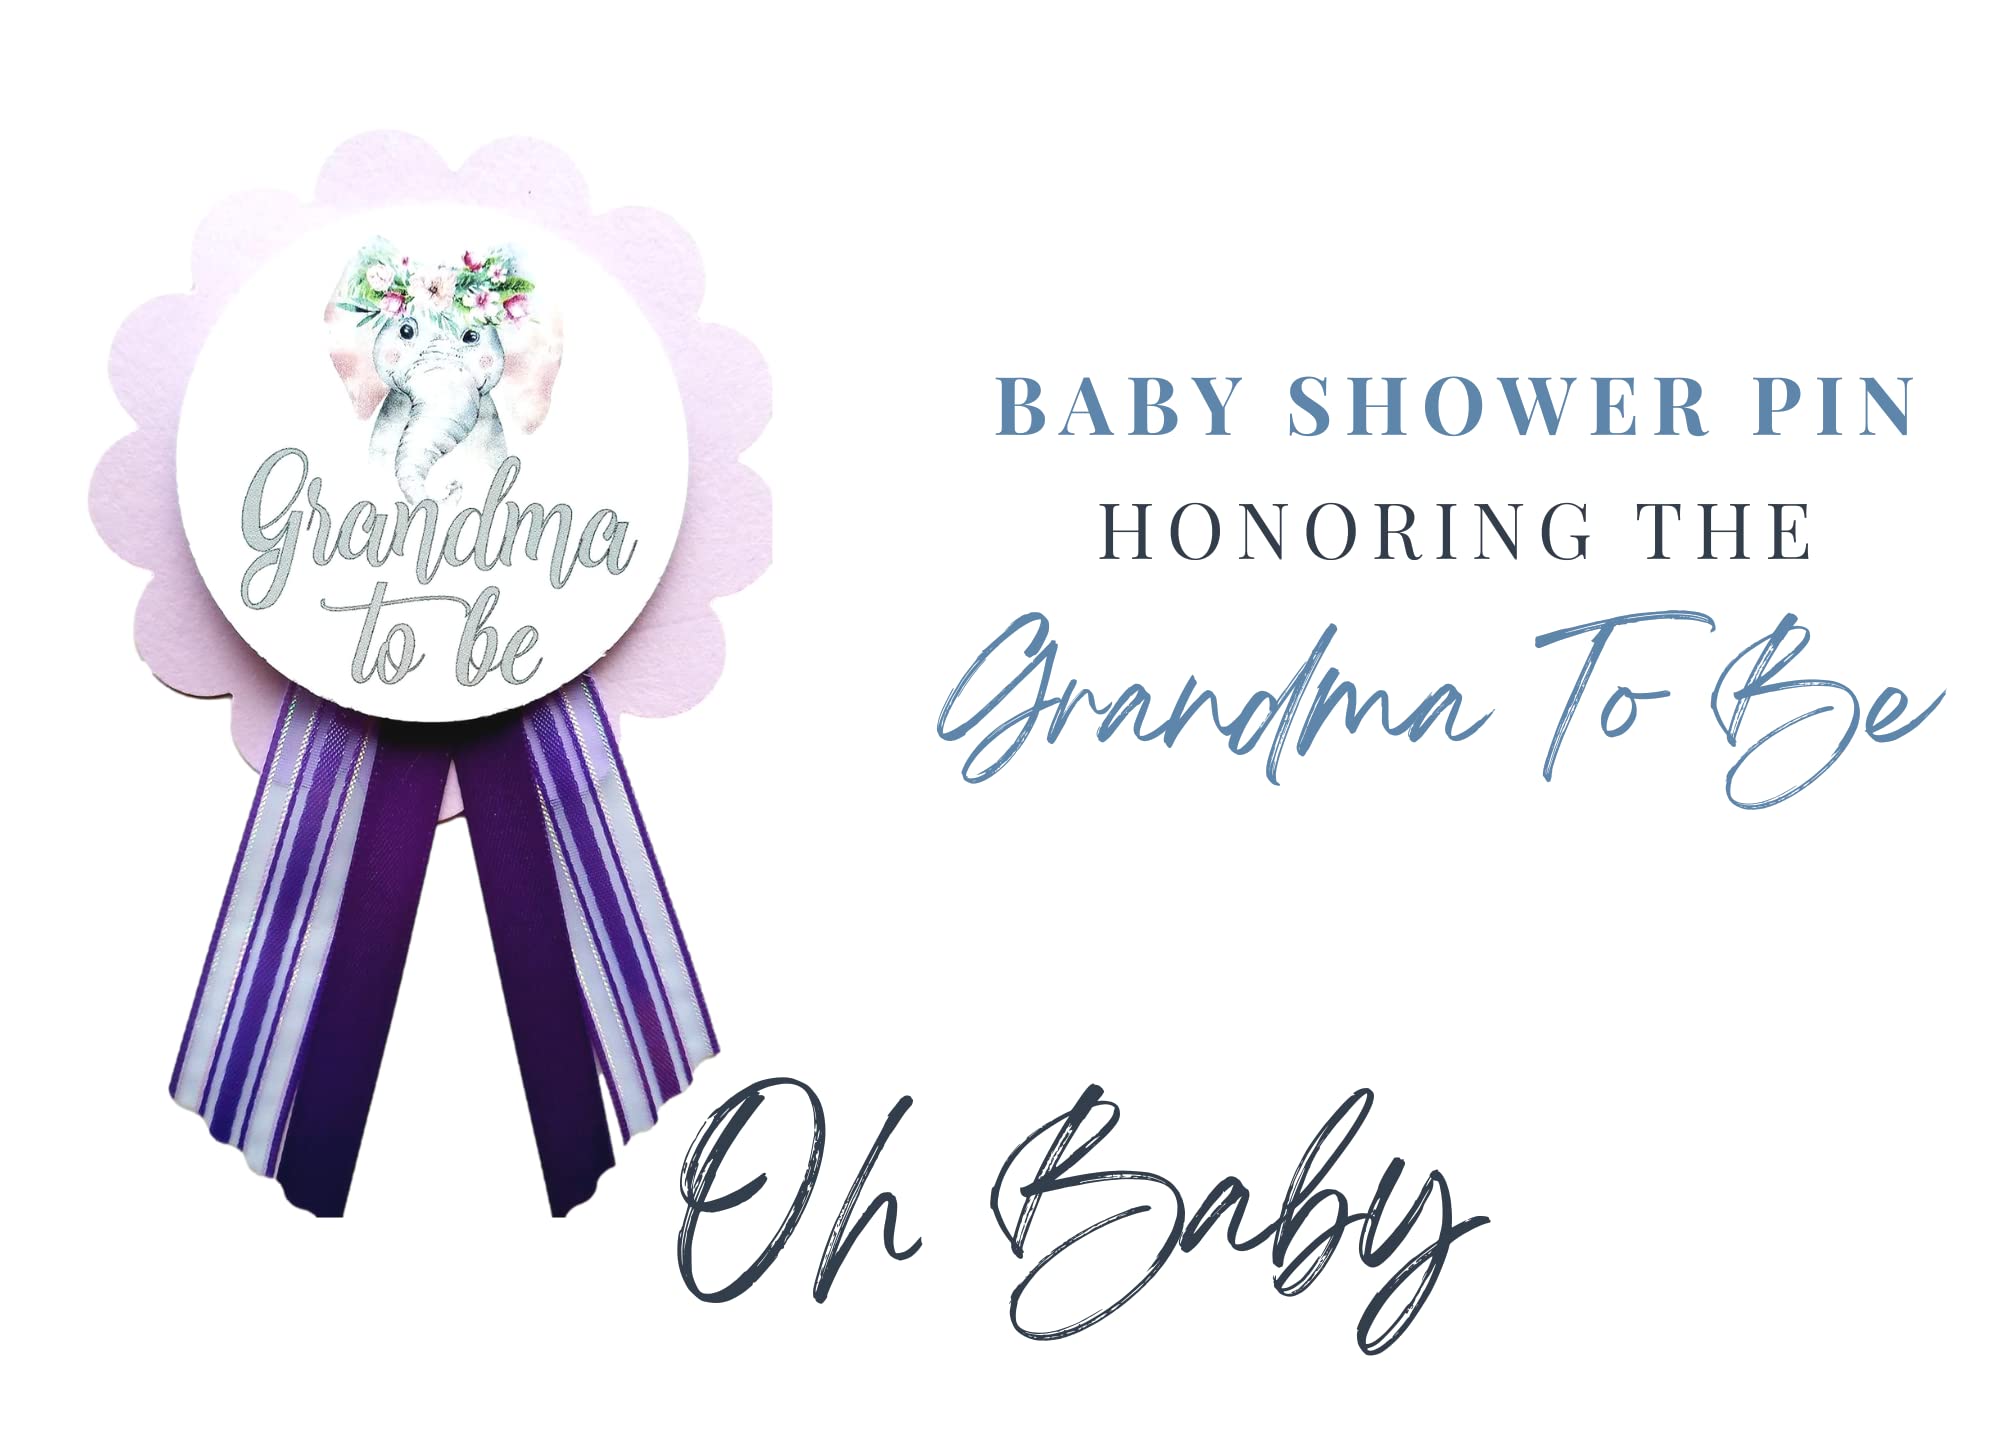 Grandma to Be Baby Shower Pin for nona to wear, Elephant Purple, It's a Girl Baby Sprinkle